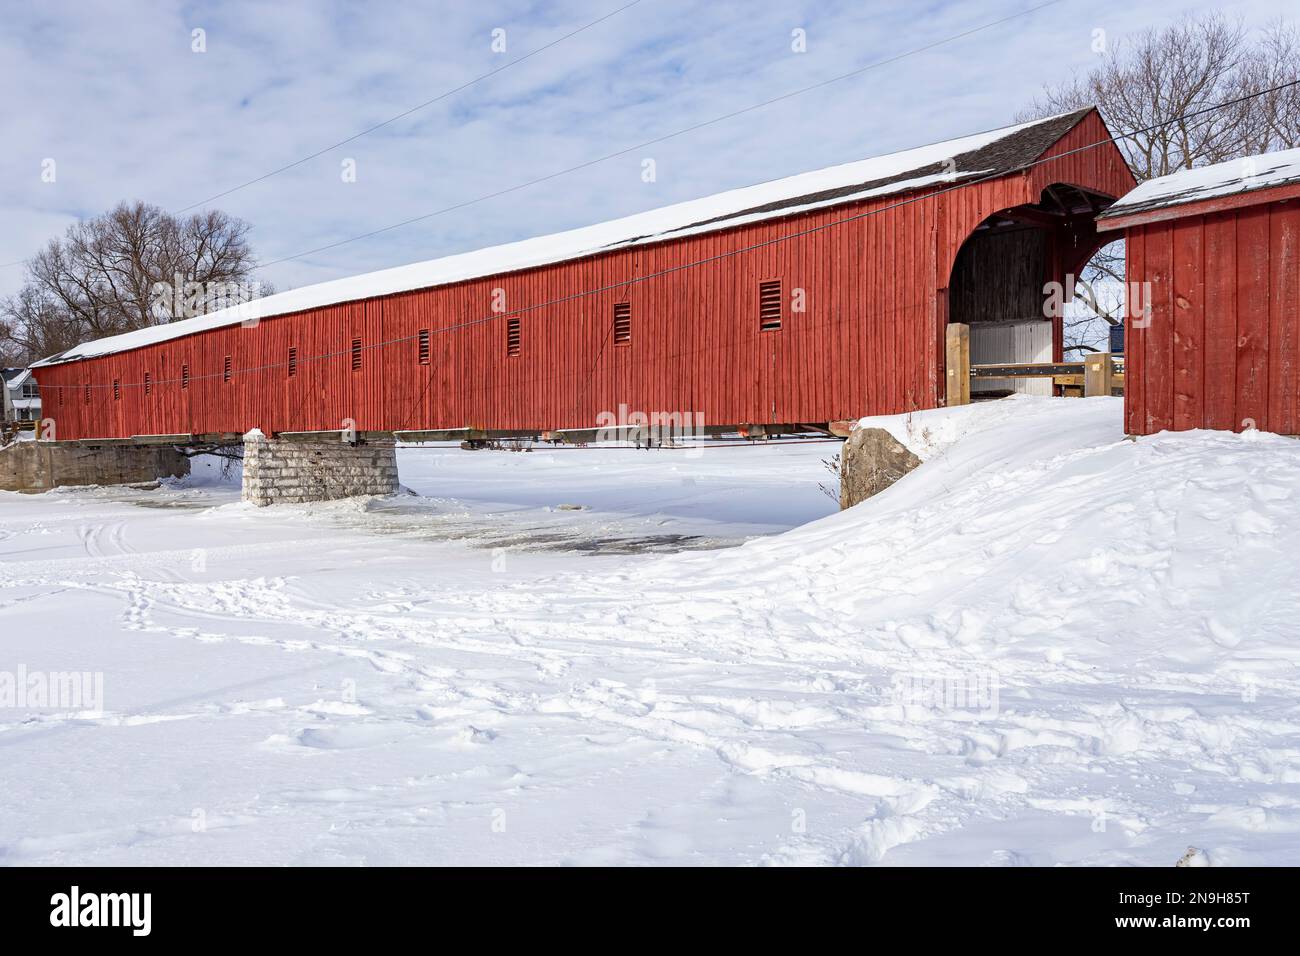 North of Kitchener, Ontario, the West Montrose Covered Bridge (also known as the Kissing Bridge) is one of the oldest of its kind in Canada.  It's 198 Stock Photo